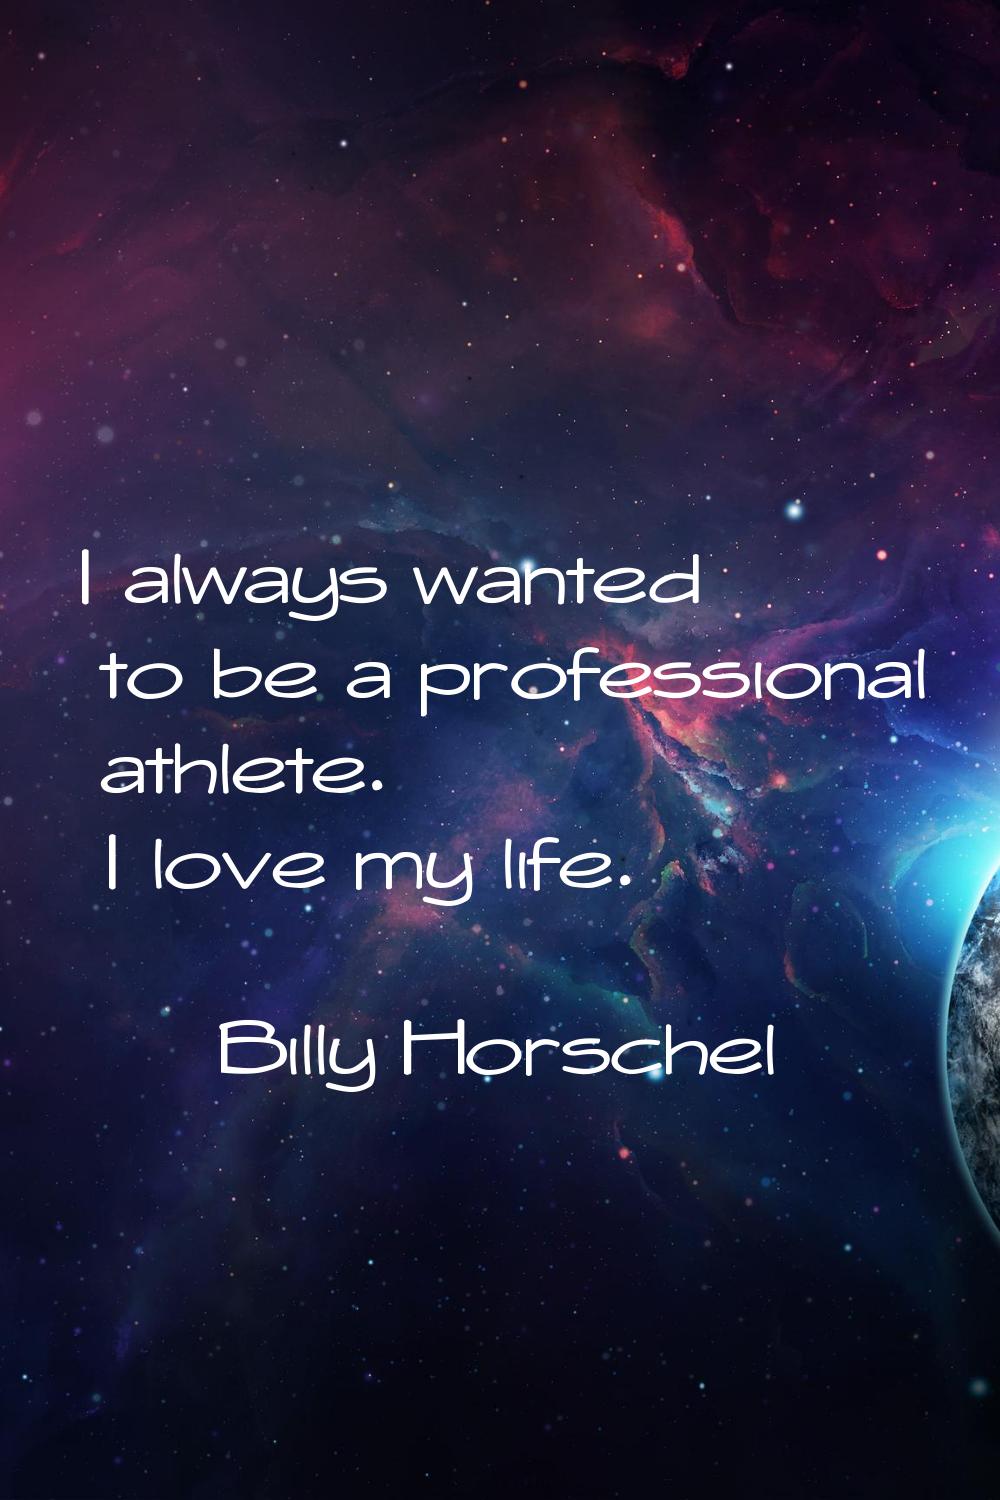 I always wanted to be a professional athlete. I love my life.